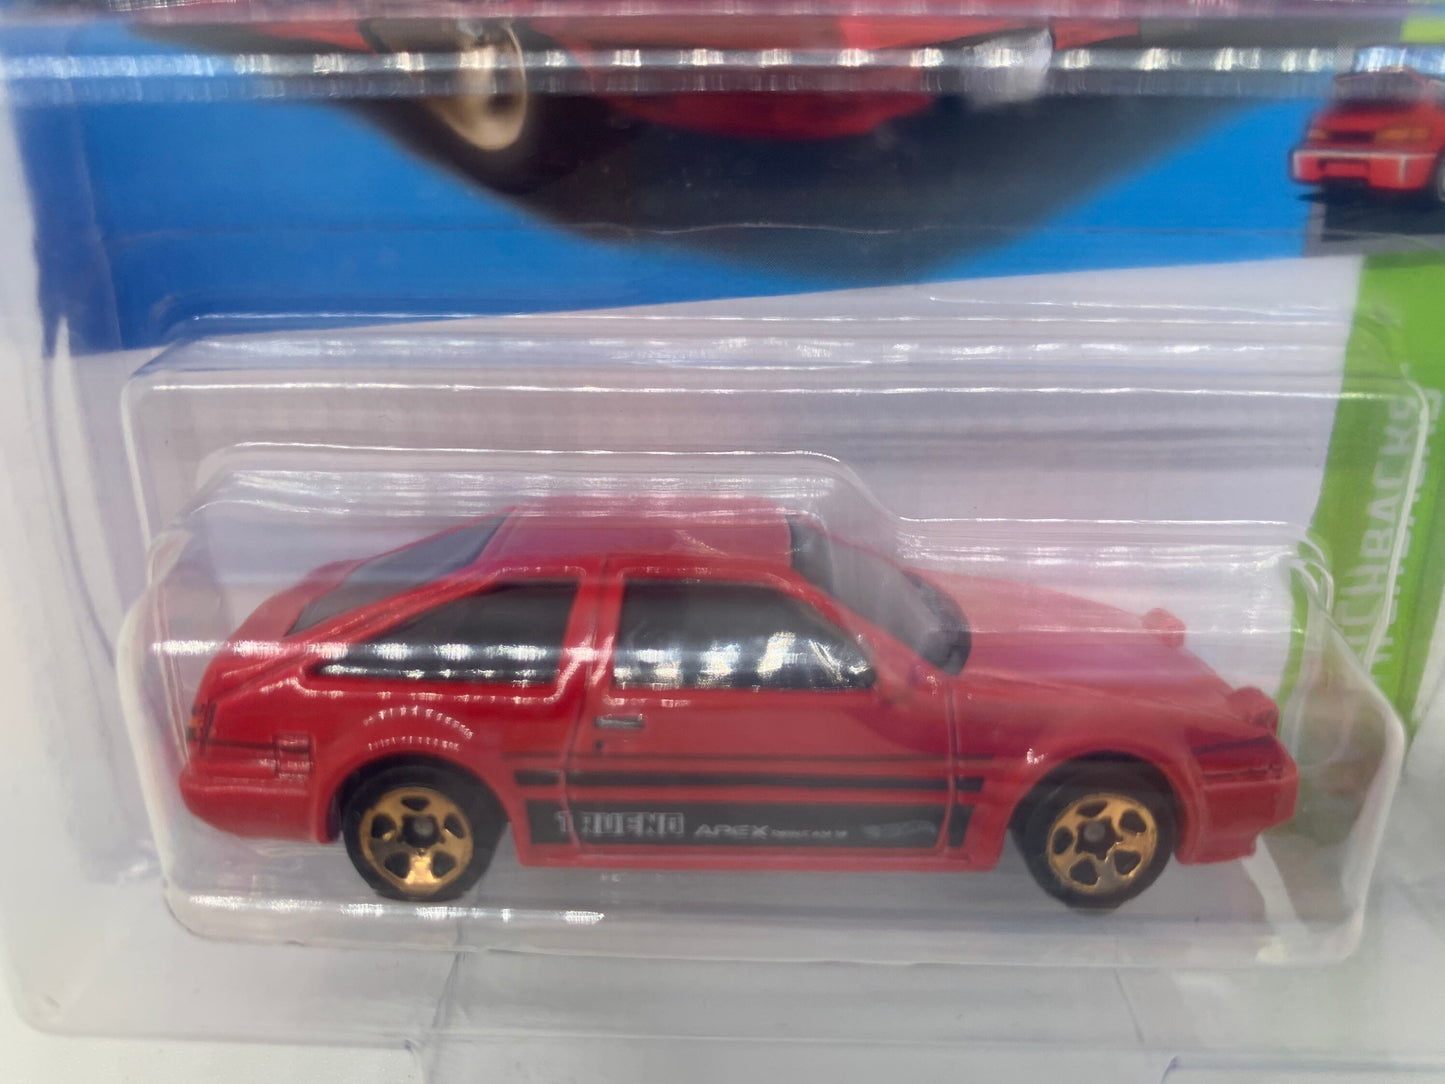 Hot Wheels Toyota AE86 Sprinter Trueno Red HW Hatchbacks Collectable Miniature Scale Model Toy Car Perfect Birthday Gift